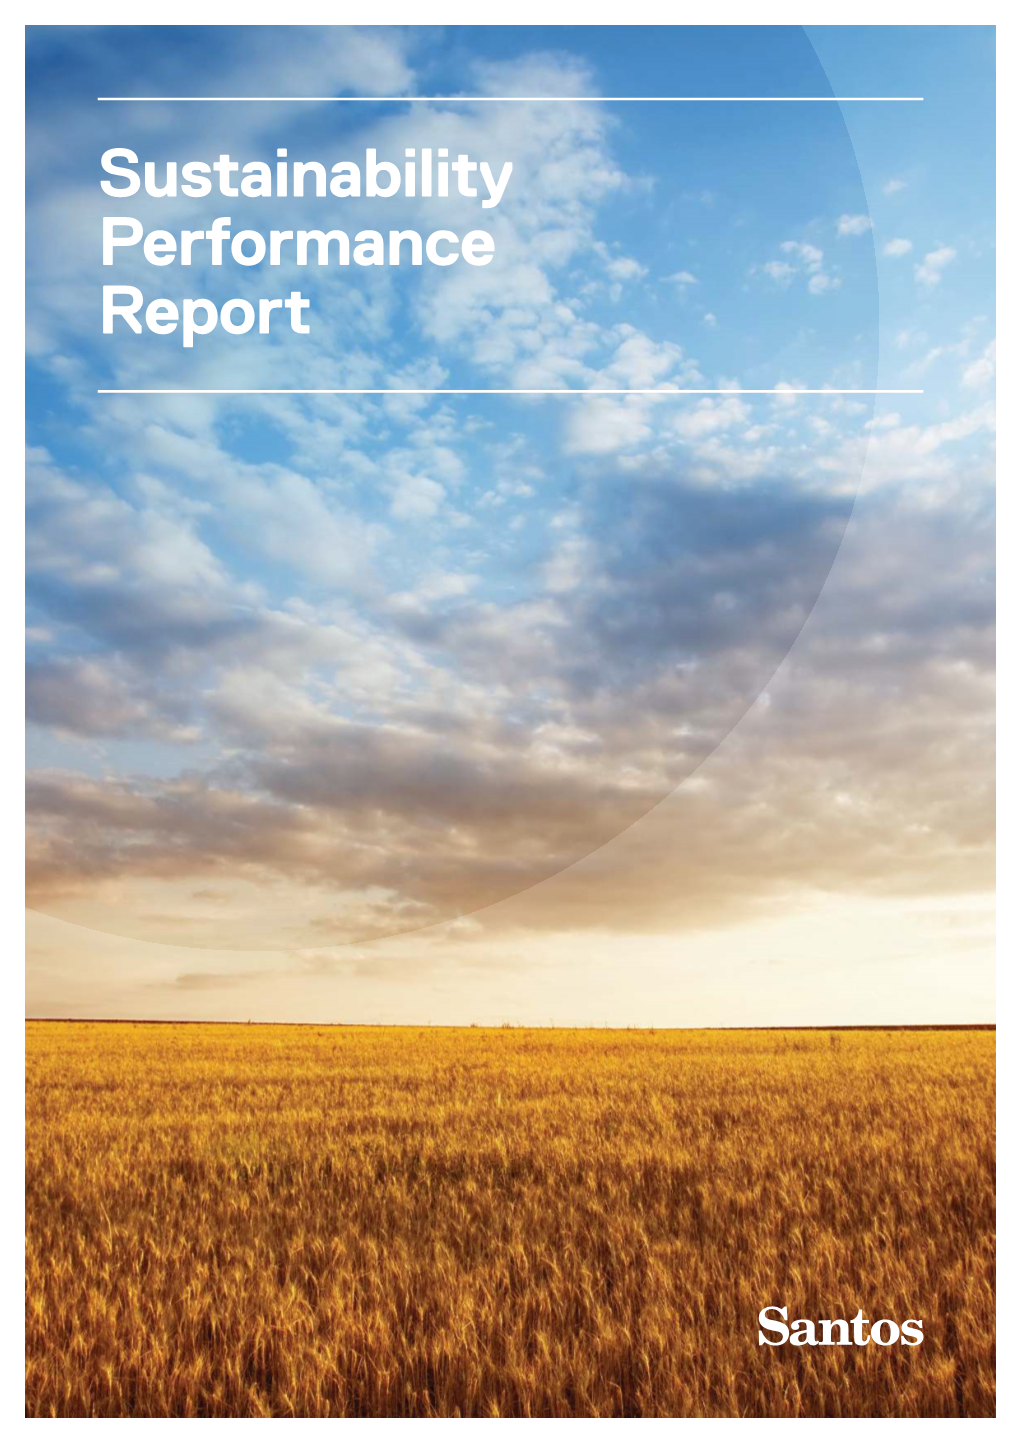 Sustainability Performance Report Contents